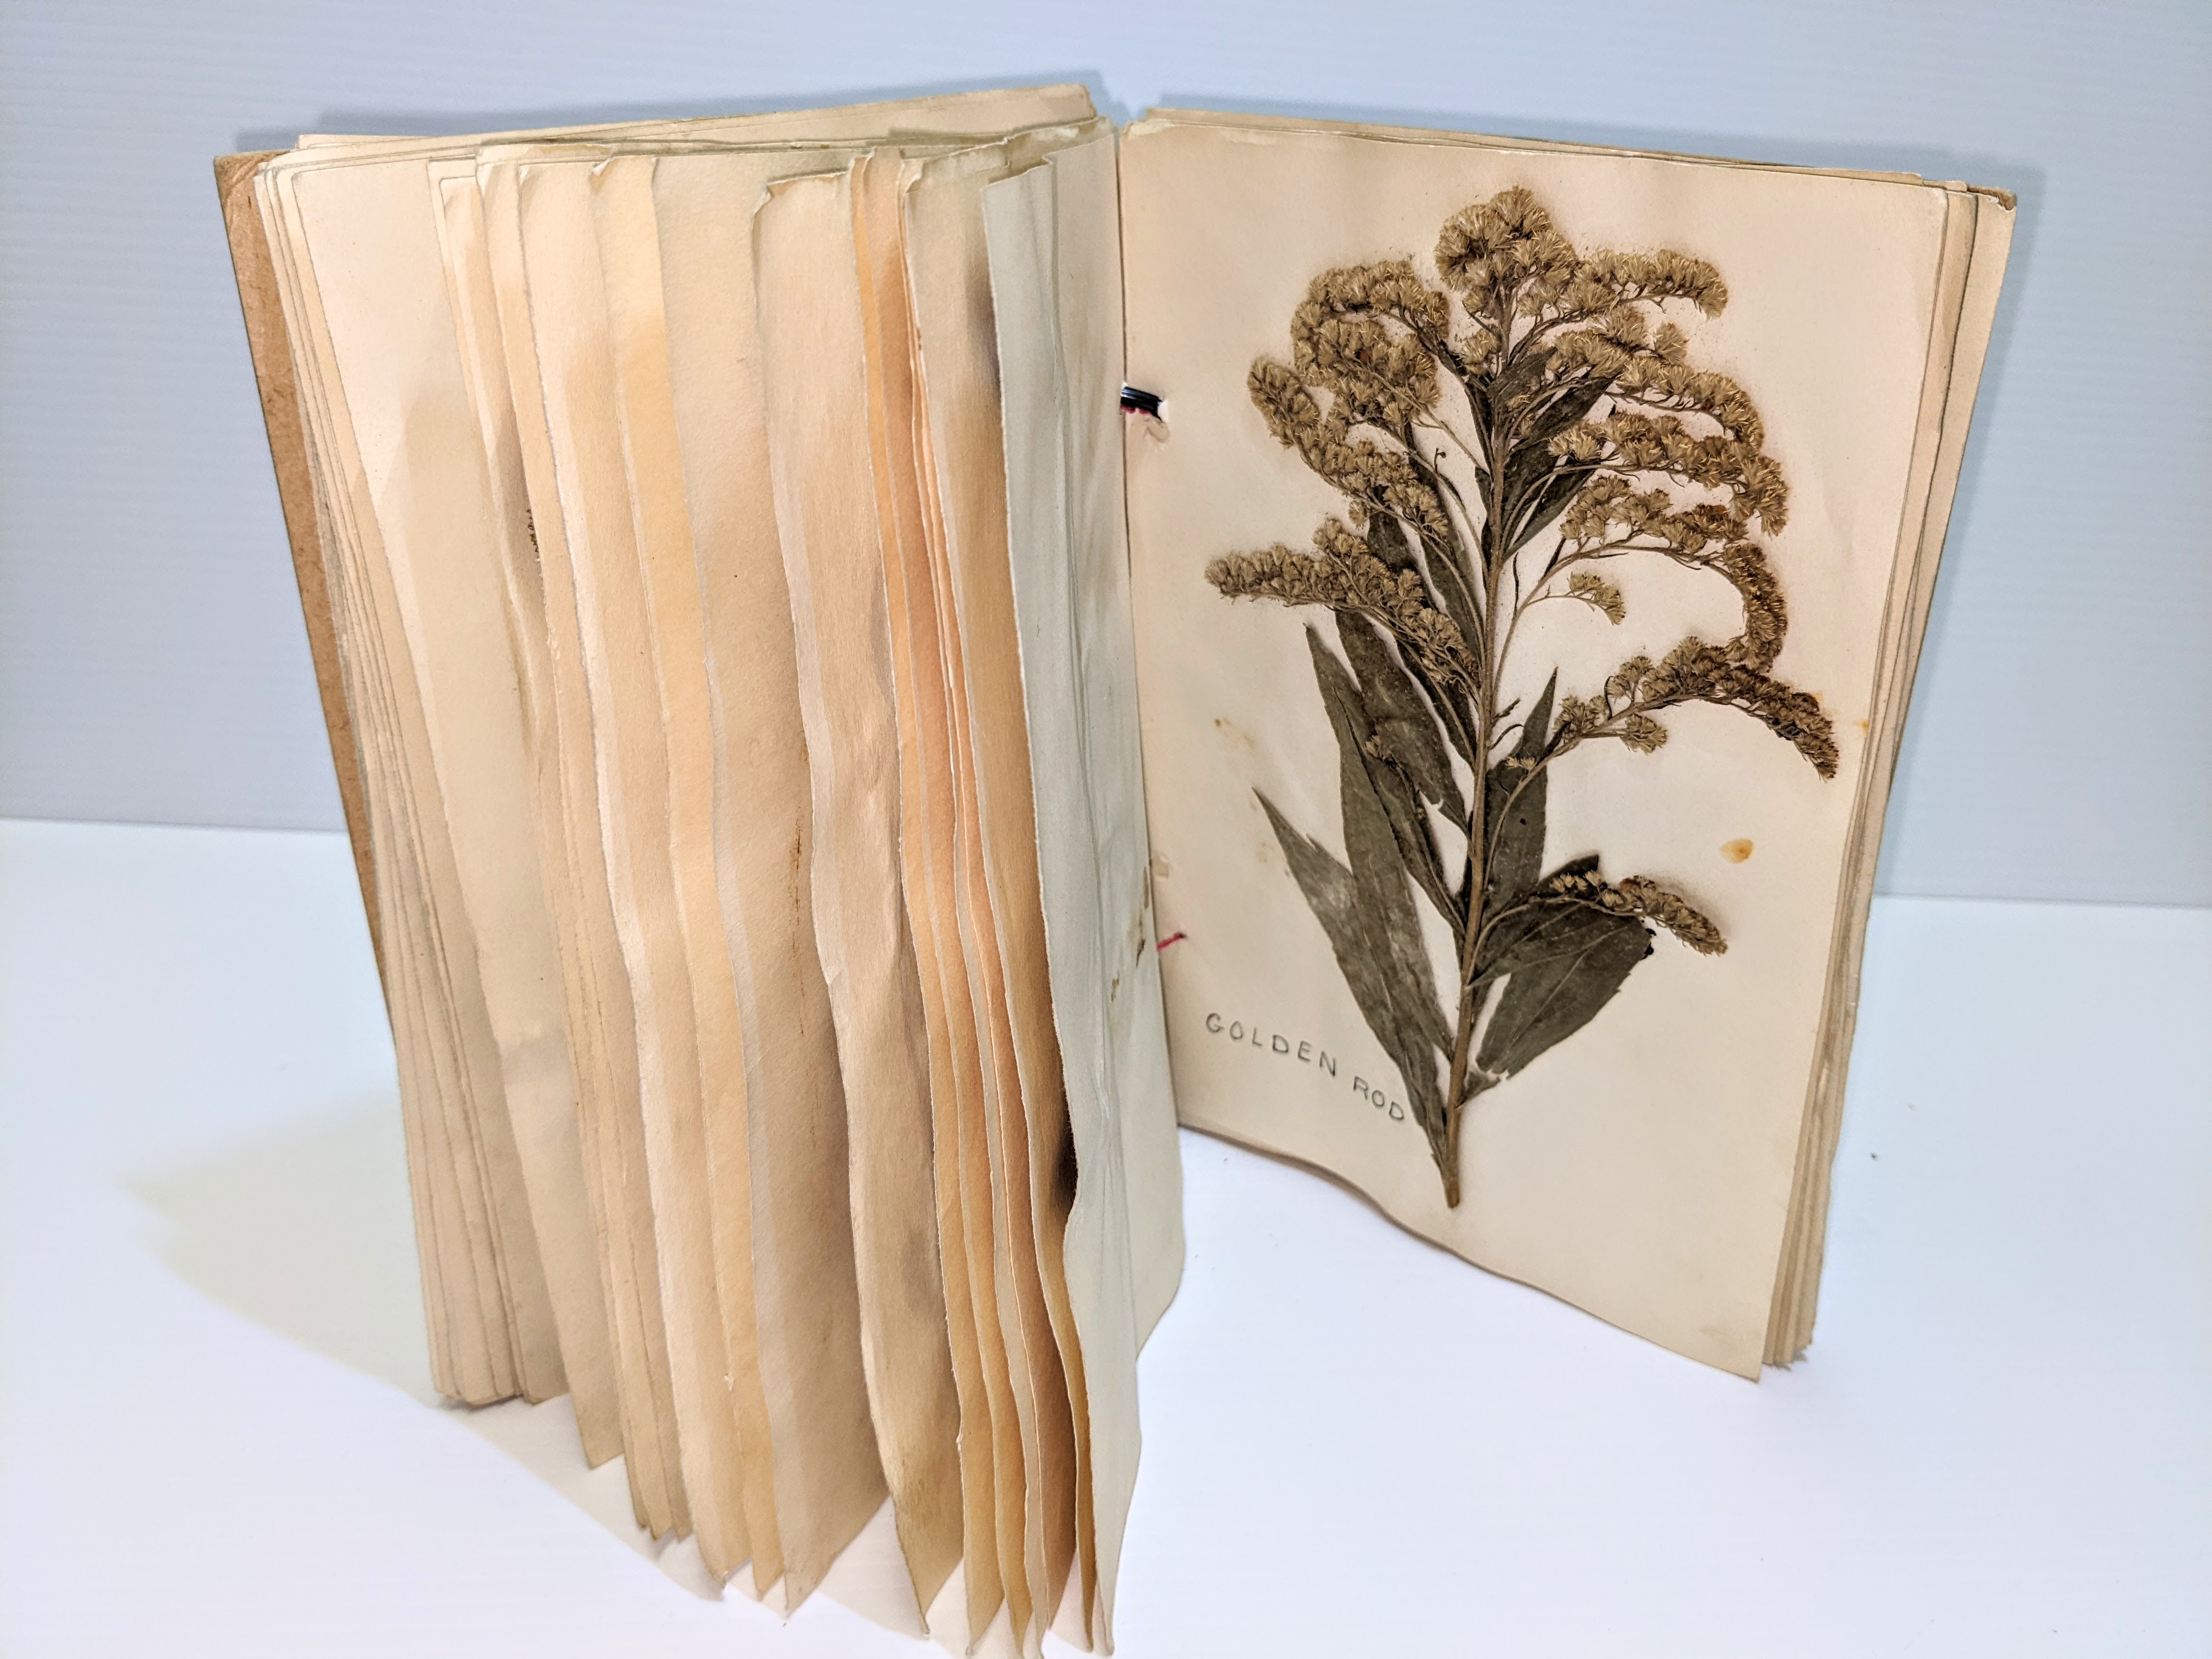 This is a book labelled "Wildflowers". It was a school project (encouraged by the Experimental Farm) in which youths would collect and compile various species of native plants from the area; drying and pressing them into a book as shown. This book was made by Jean Campbell at the end of the 30's and contains dried specimens of over 80 plants! It also won first prize at the Agriculture fair the year it was made!
2002.226.112 / Campbell, Jean
01/08/2022